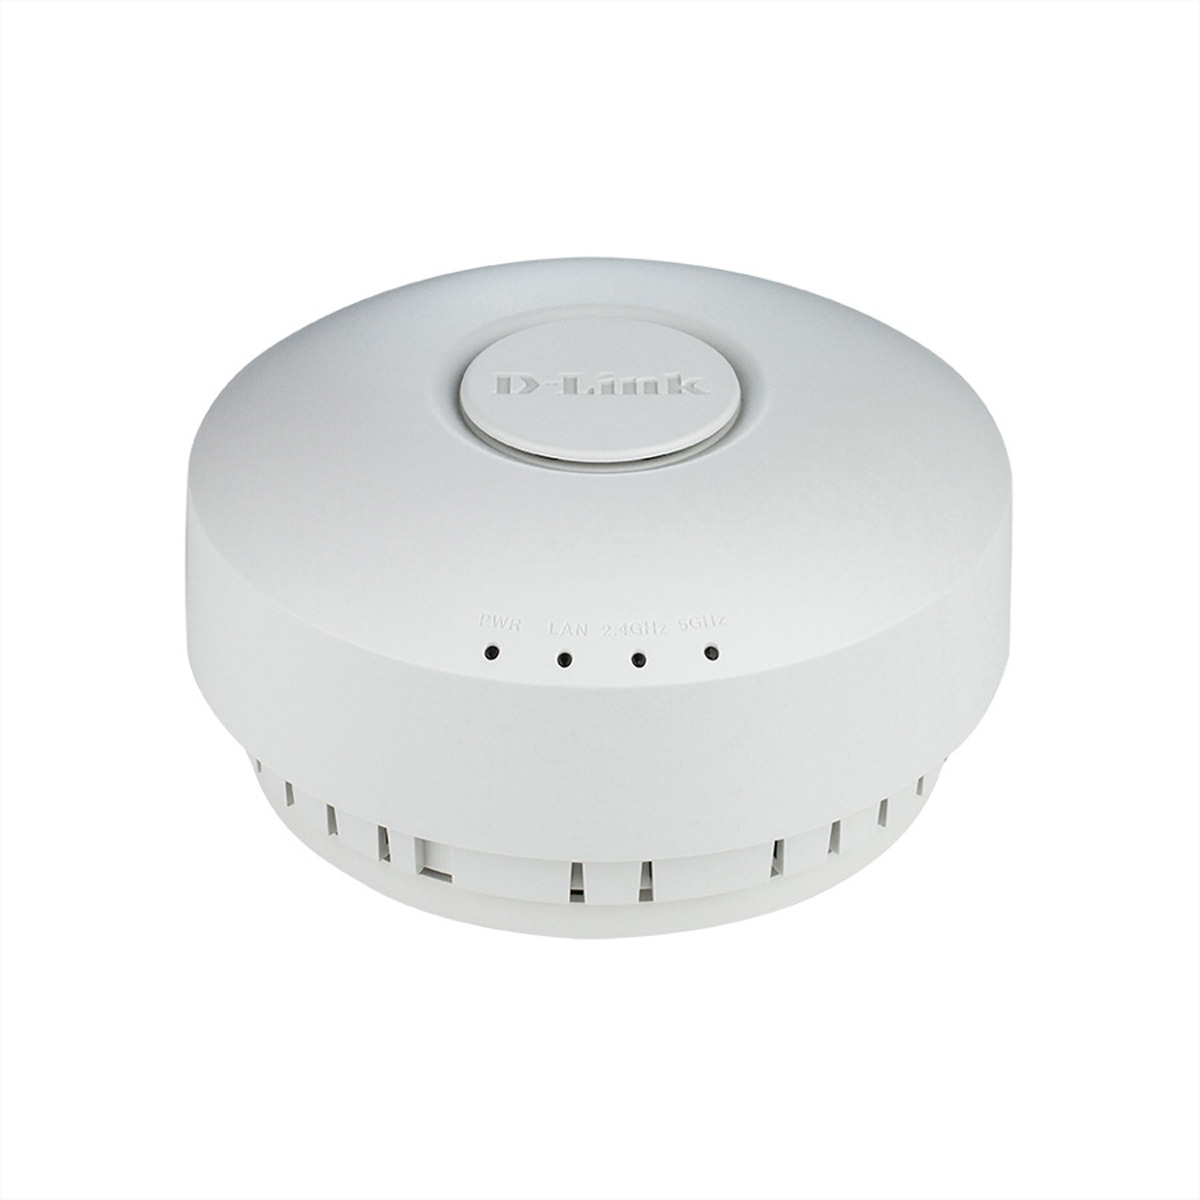 D-LINK DWL-6610AP Unified Access WLAN Access Points Point Gbit/s Dualband 1,2 AC1200